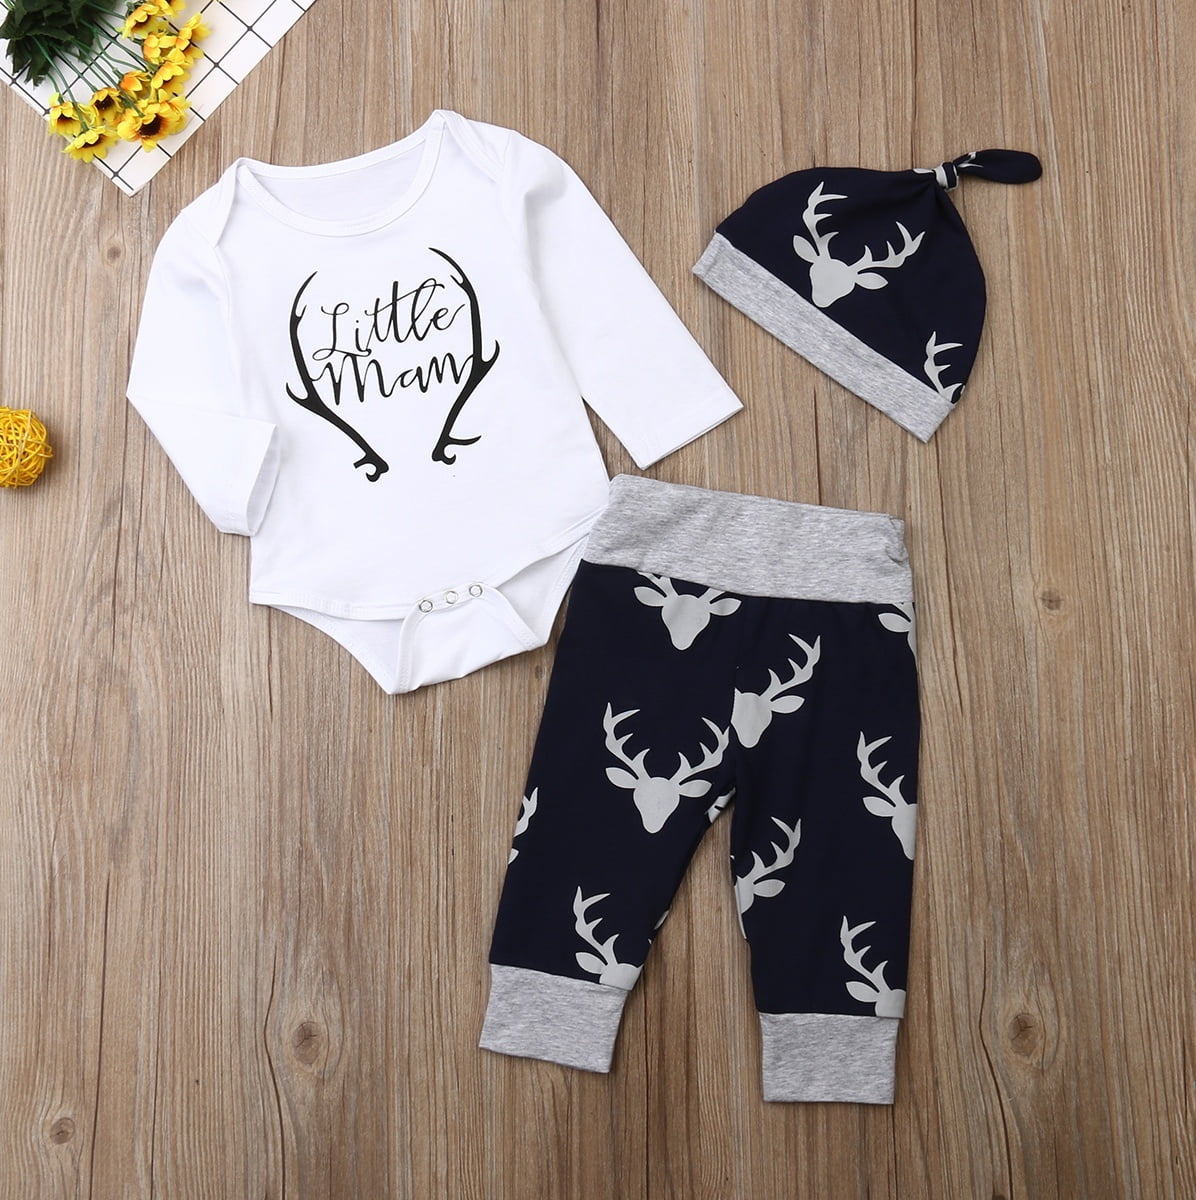 baby boy clothing store